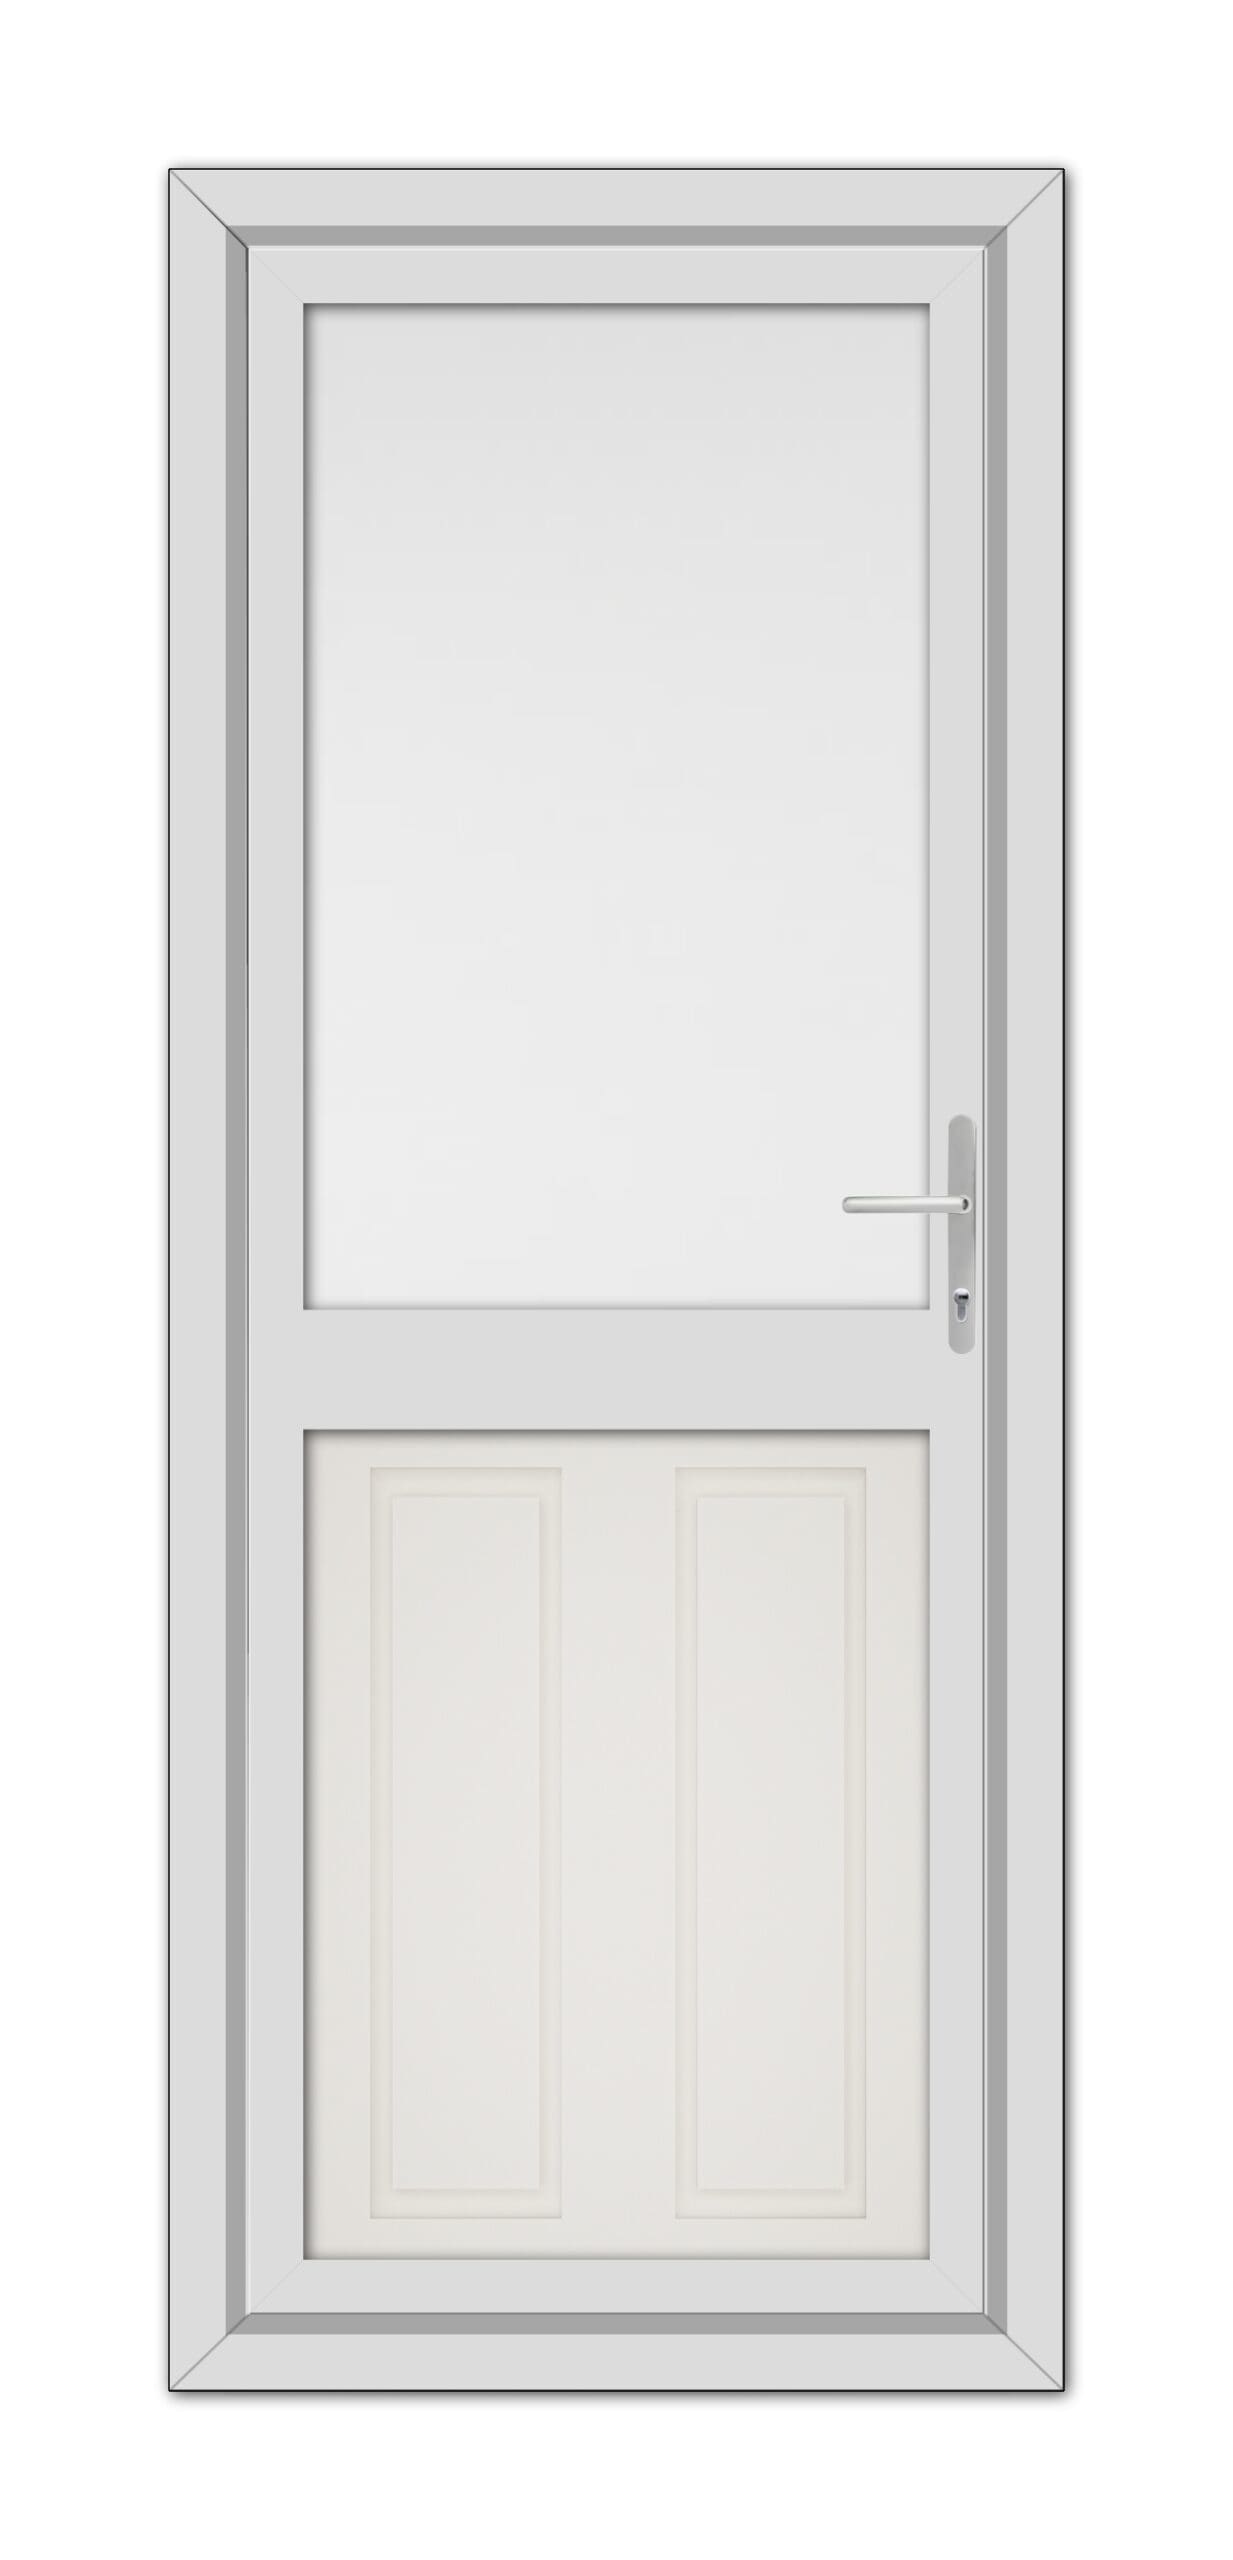 A White Cream Manor Half uPVC Back Door with a small window at the top, featuring a metal handle on the right side, set within a grey frame.